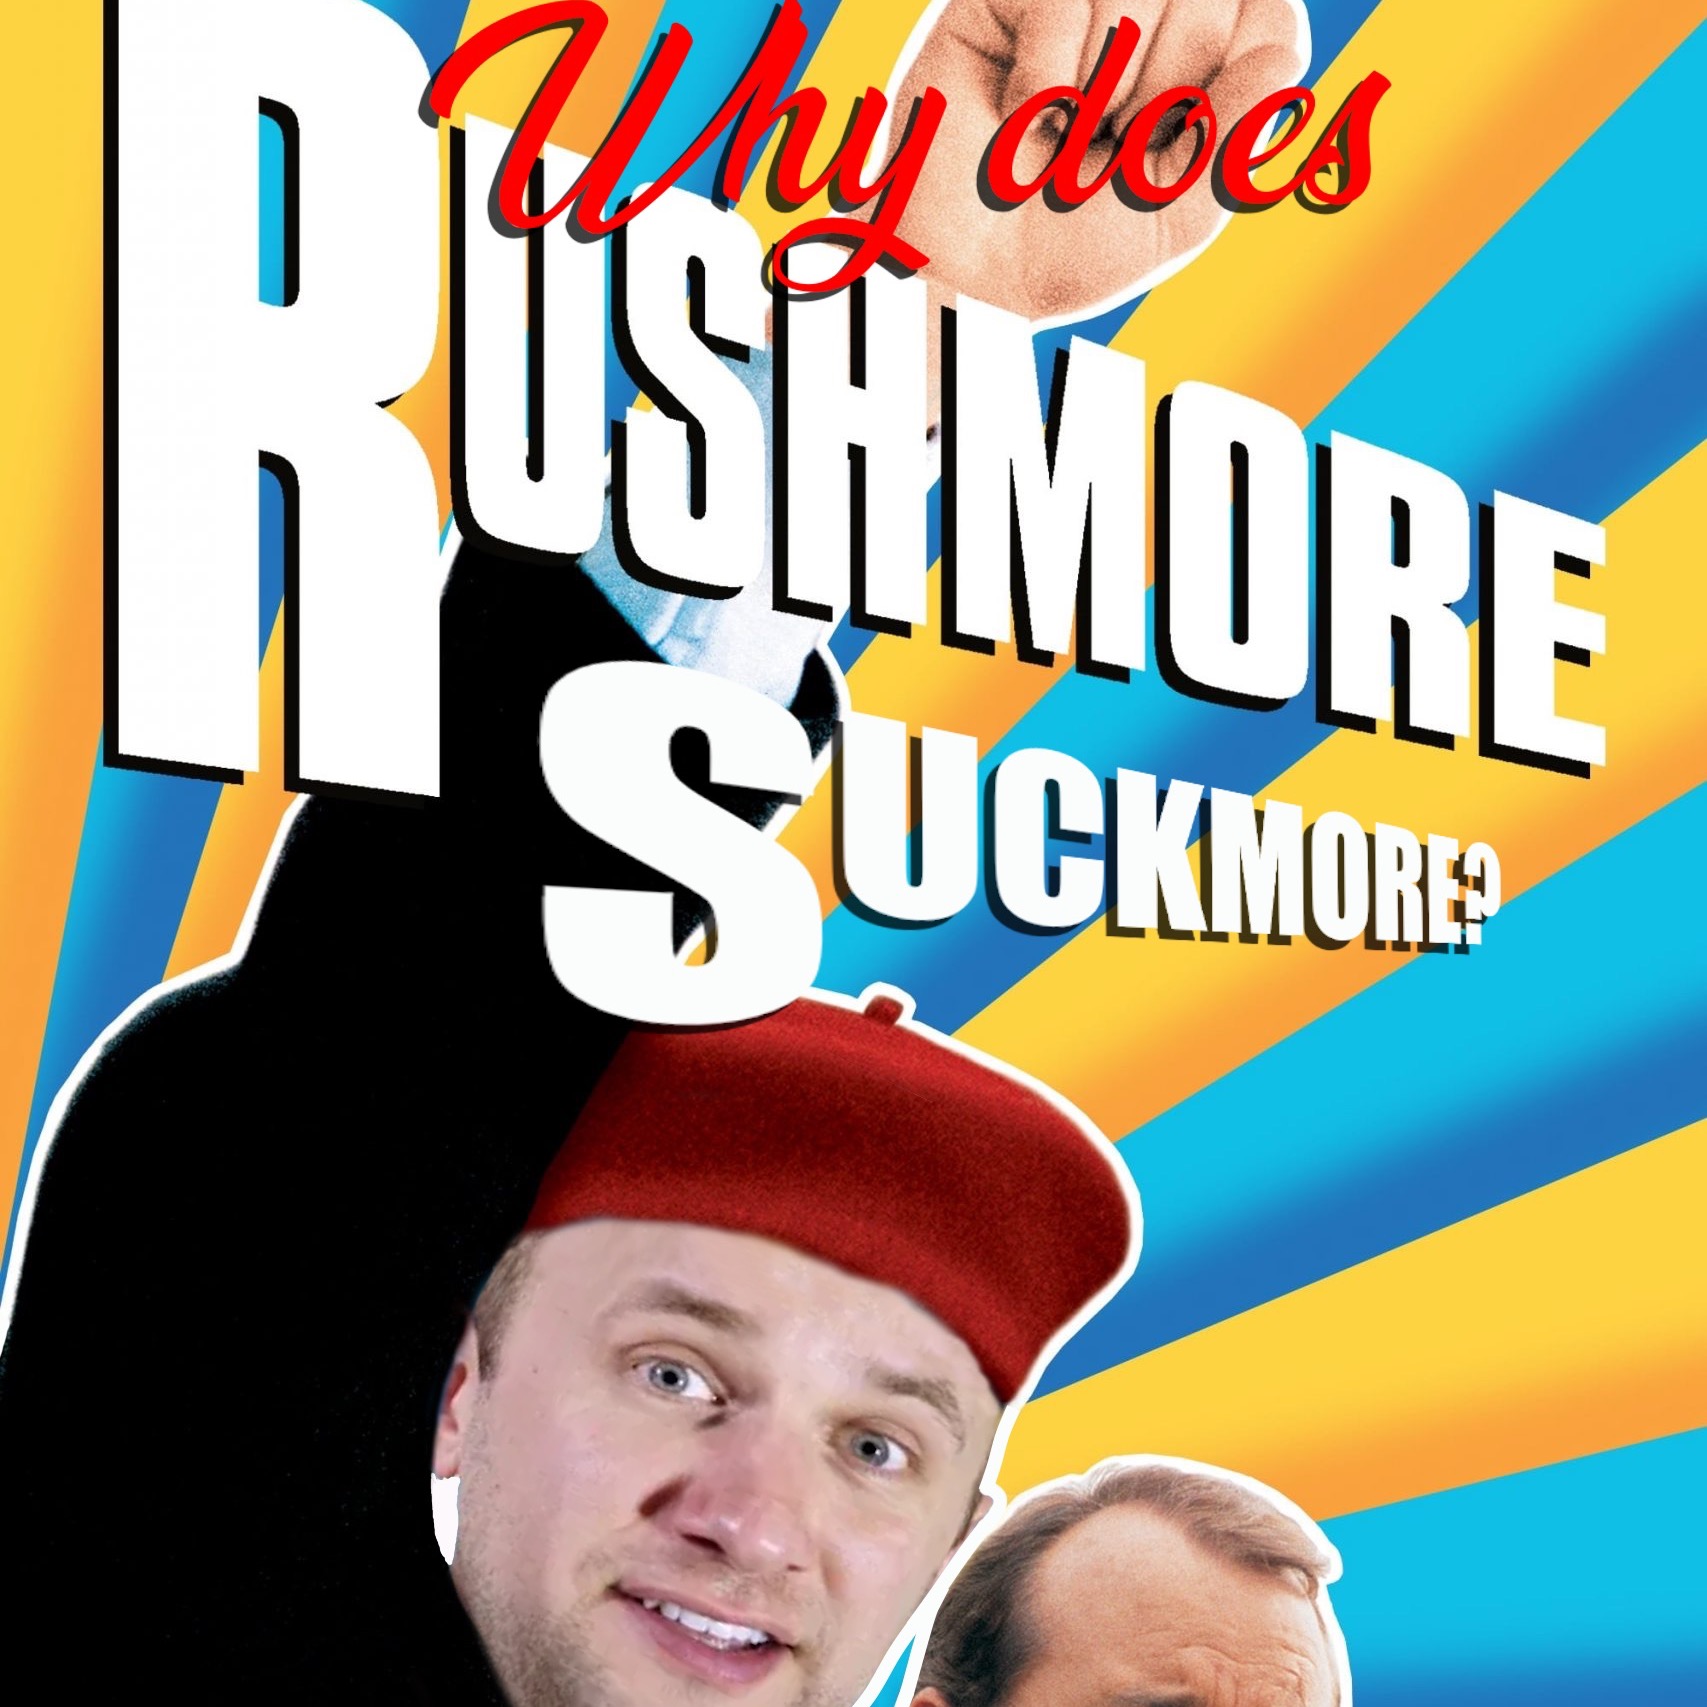 Lisa Curry EXPELS Rushmore Episode 211 GTSC podcast